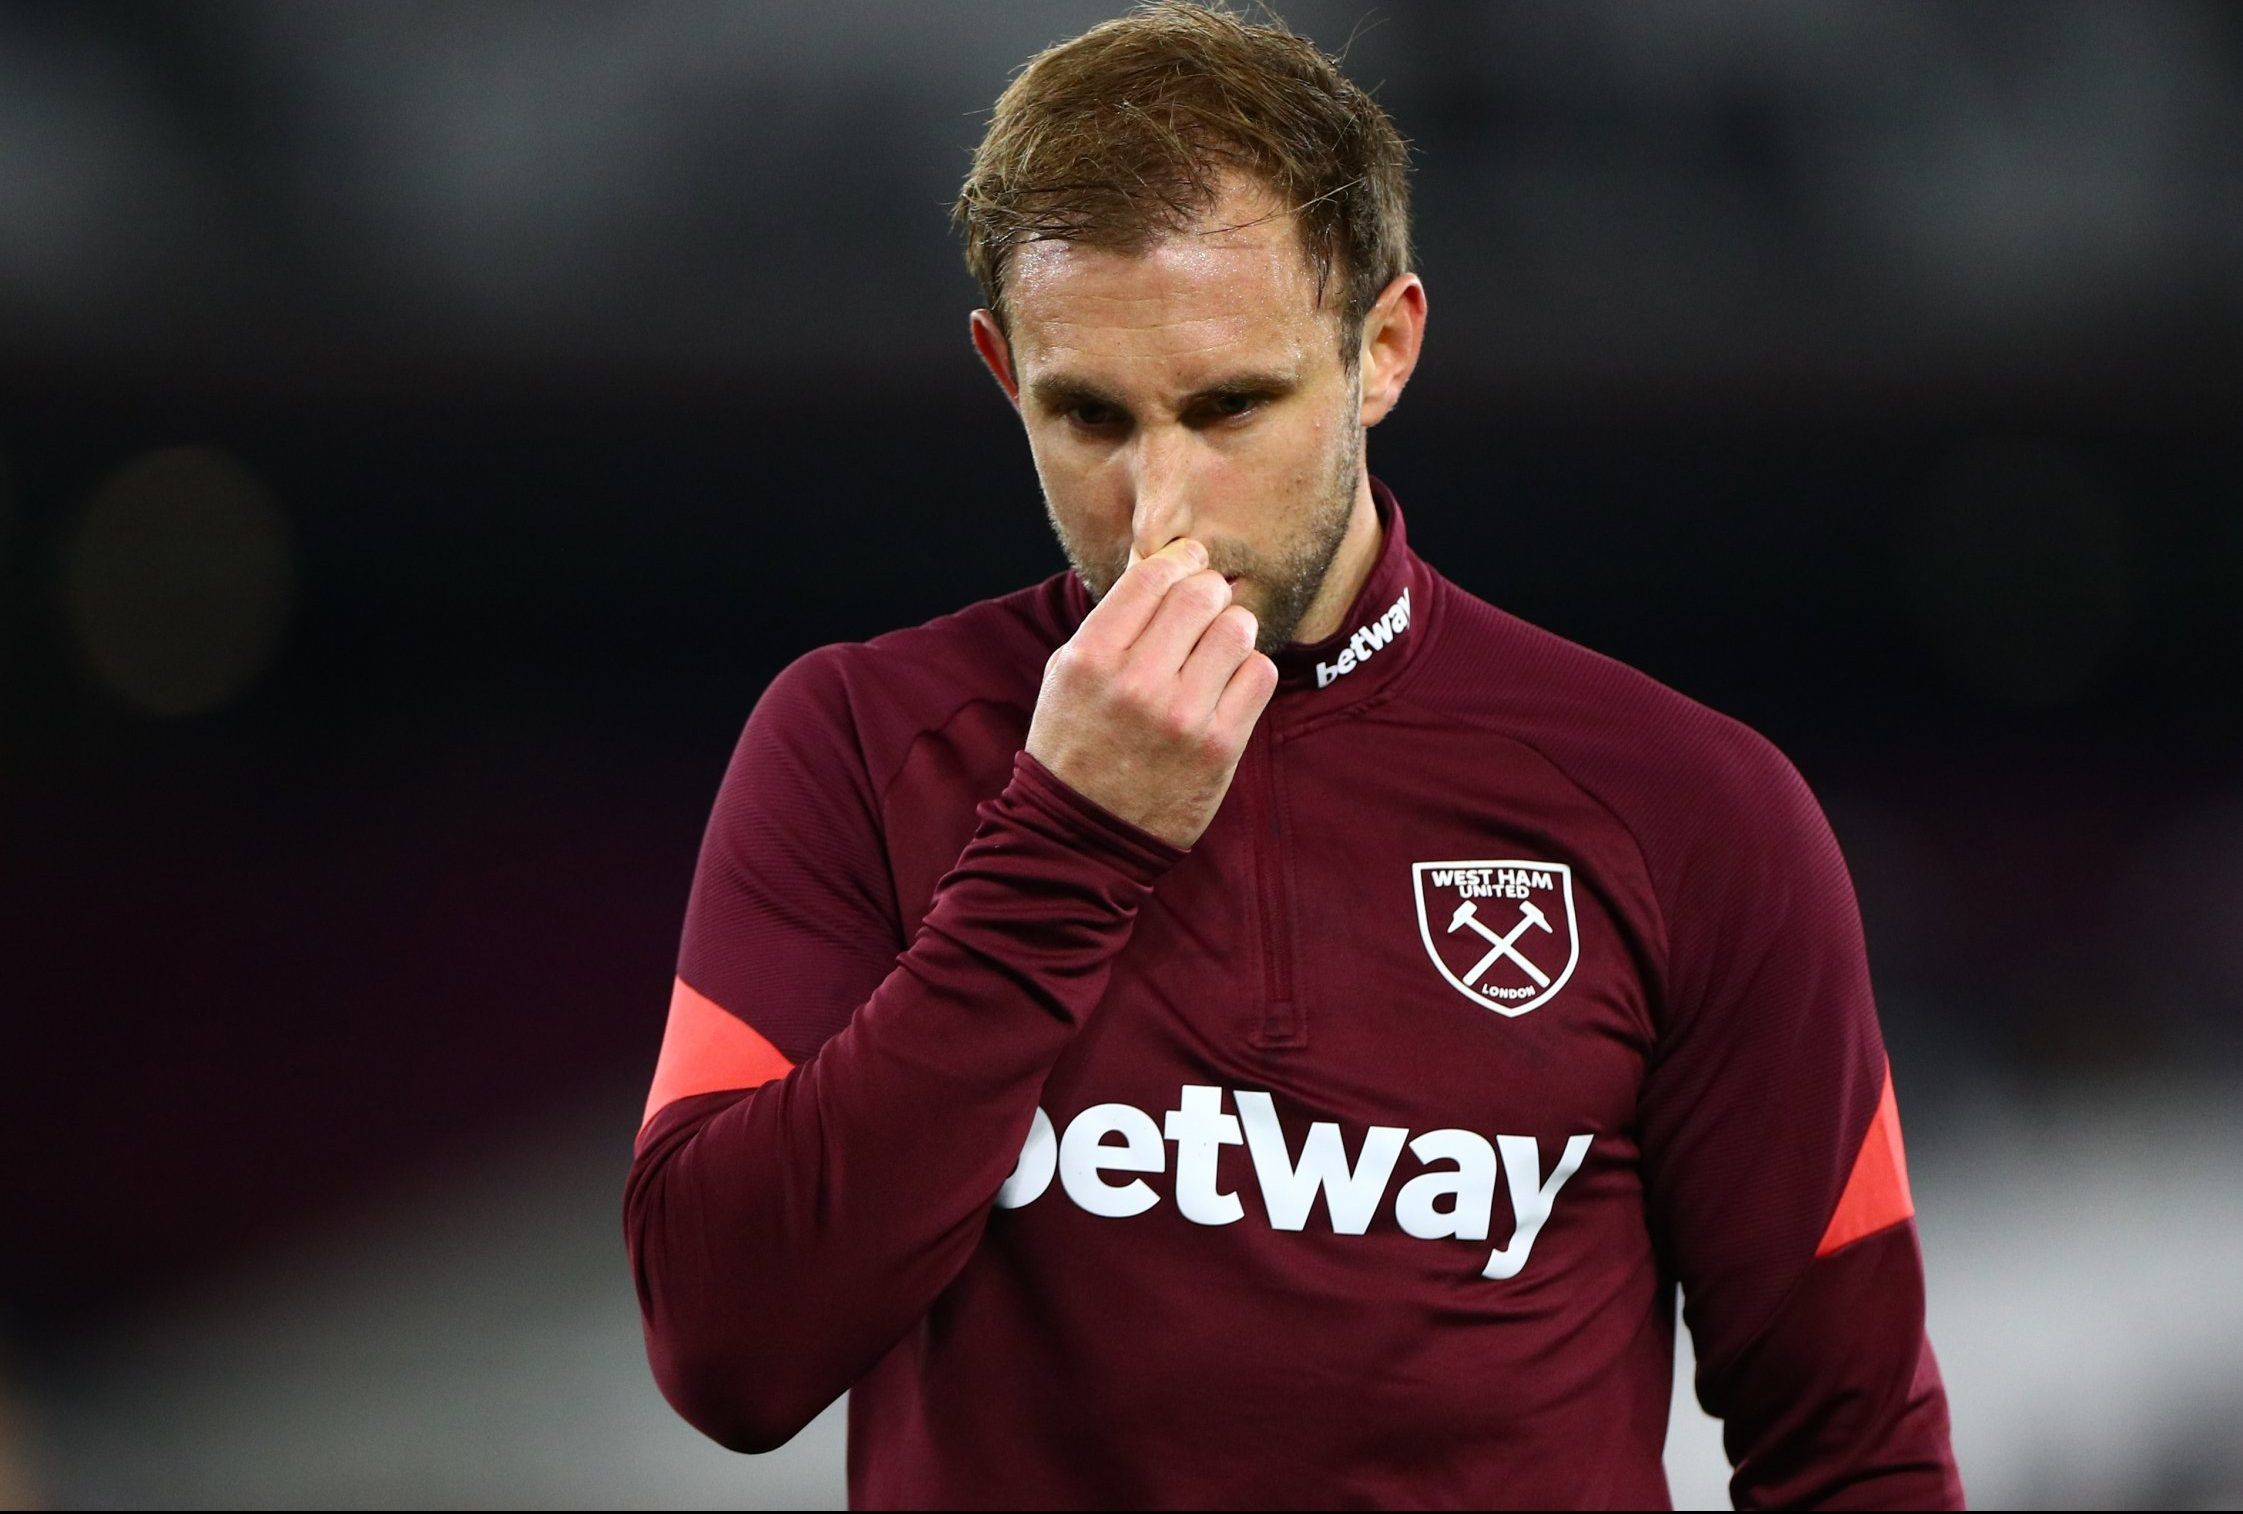 West Ham defender Craig Dawson looks on during warm up before Premier League clash with Brighton and Hove Albion